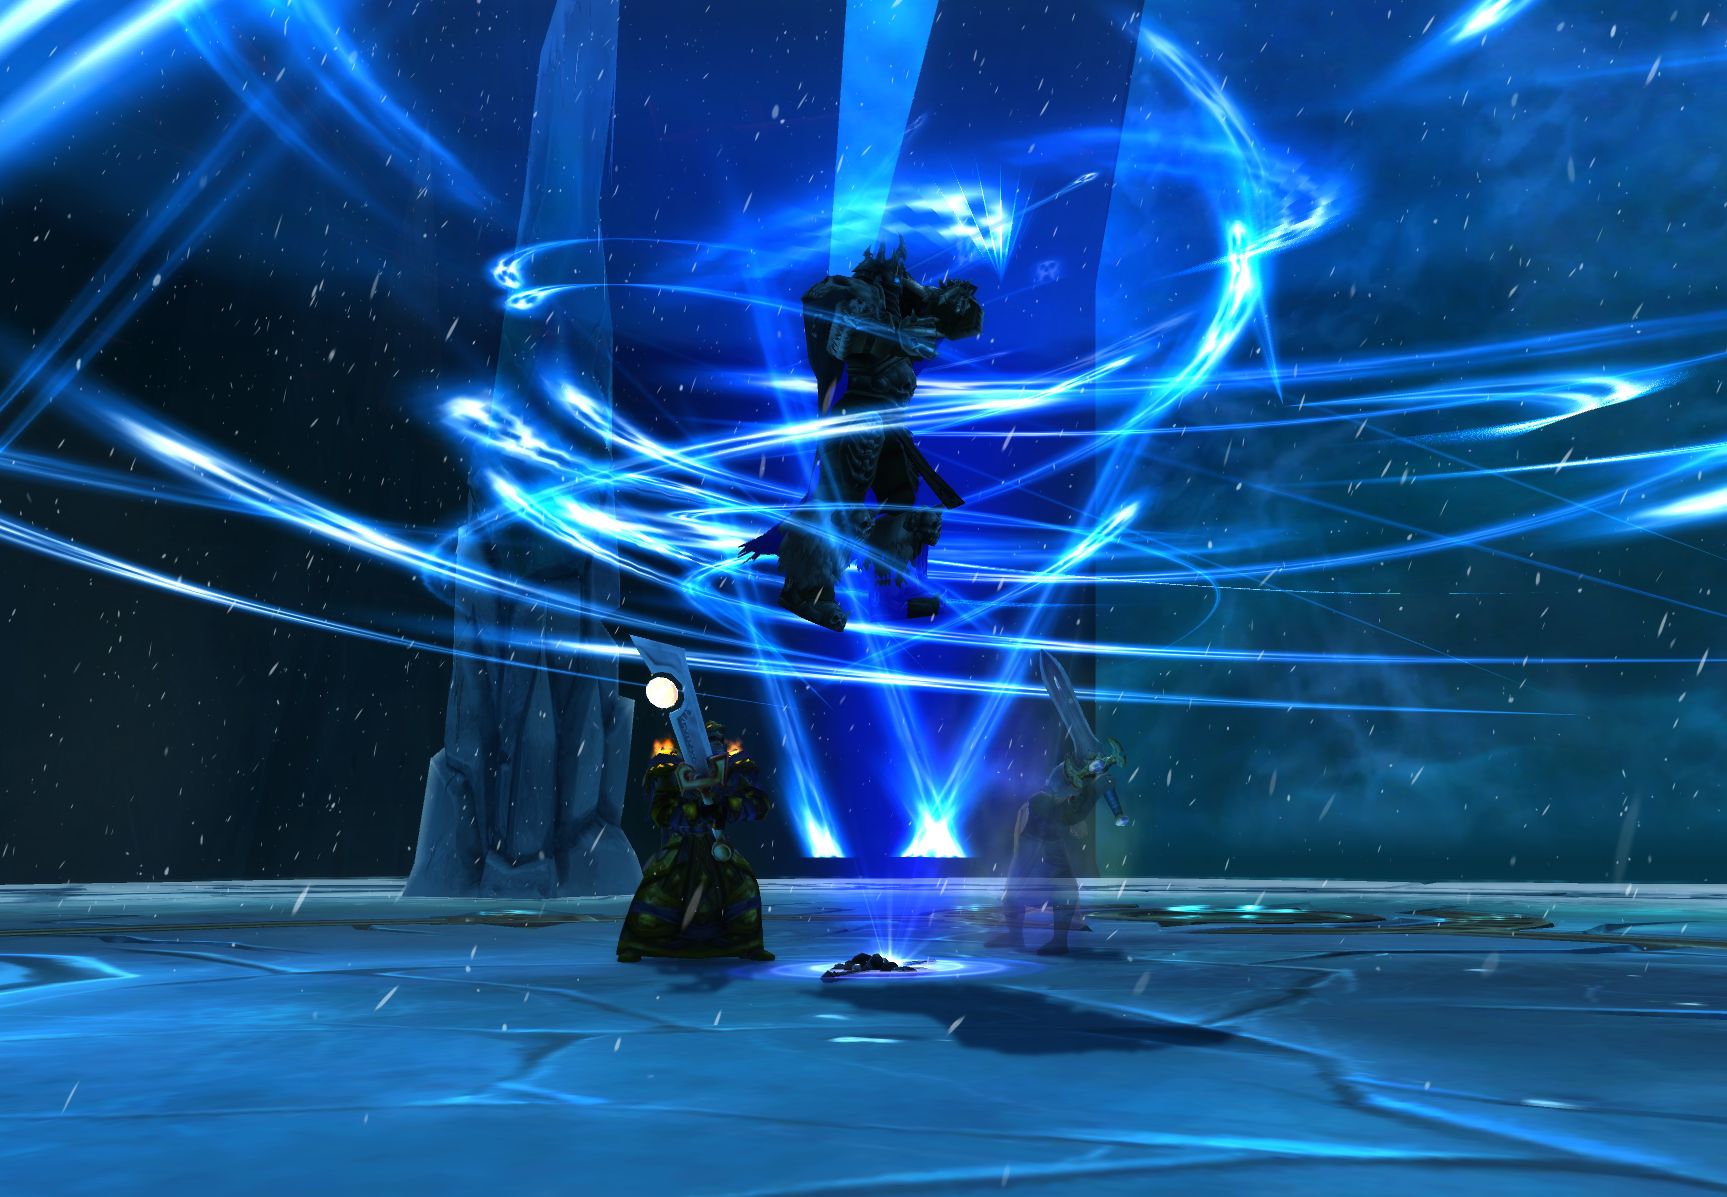 Image of a player fighting The Lich King in Icecrown Citadel.